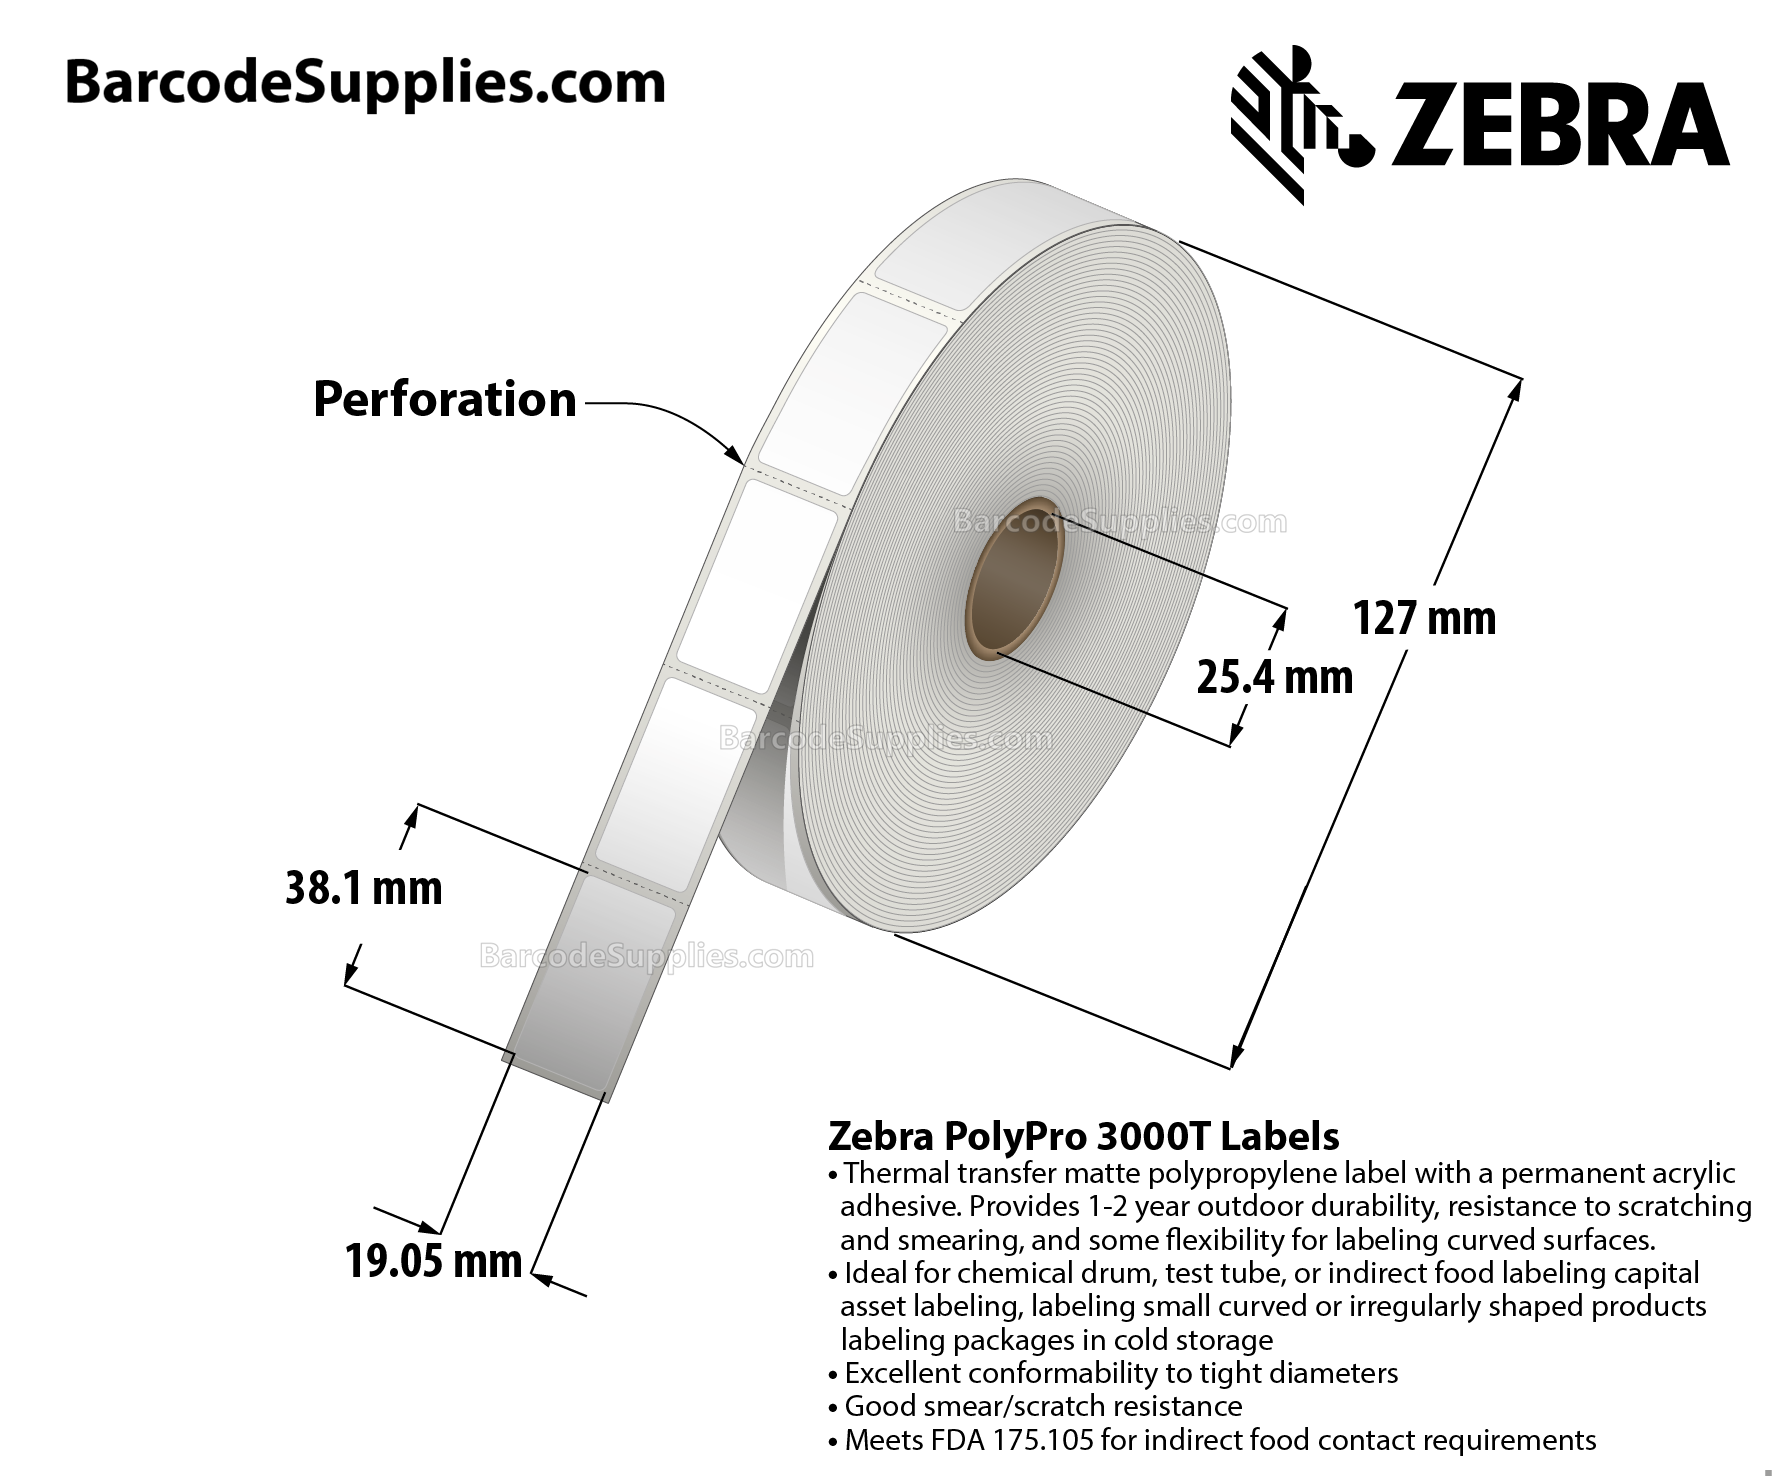 0.75 x 1.5 Thermal Transfer White PolyPro 3000T Labels With Permanent Adhesive - Perforated - 1450 Labels Per Roll - Carton Of 1 Rolls - 1450 Labels Total - MPN: 10023326